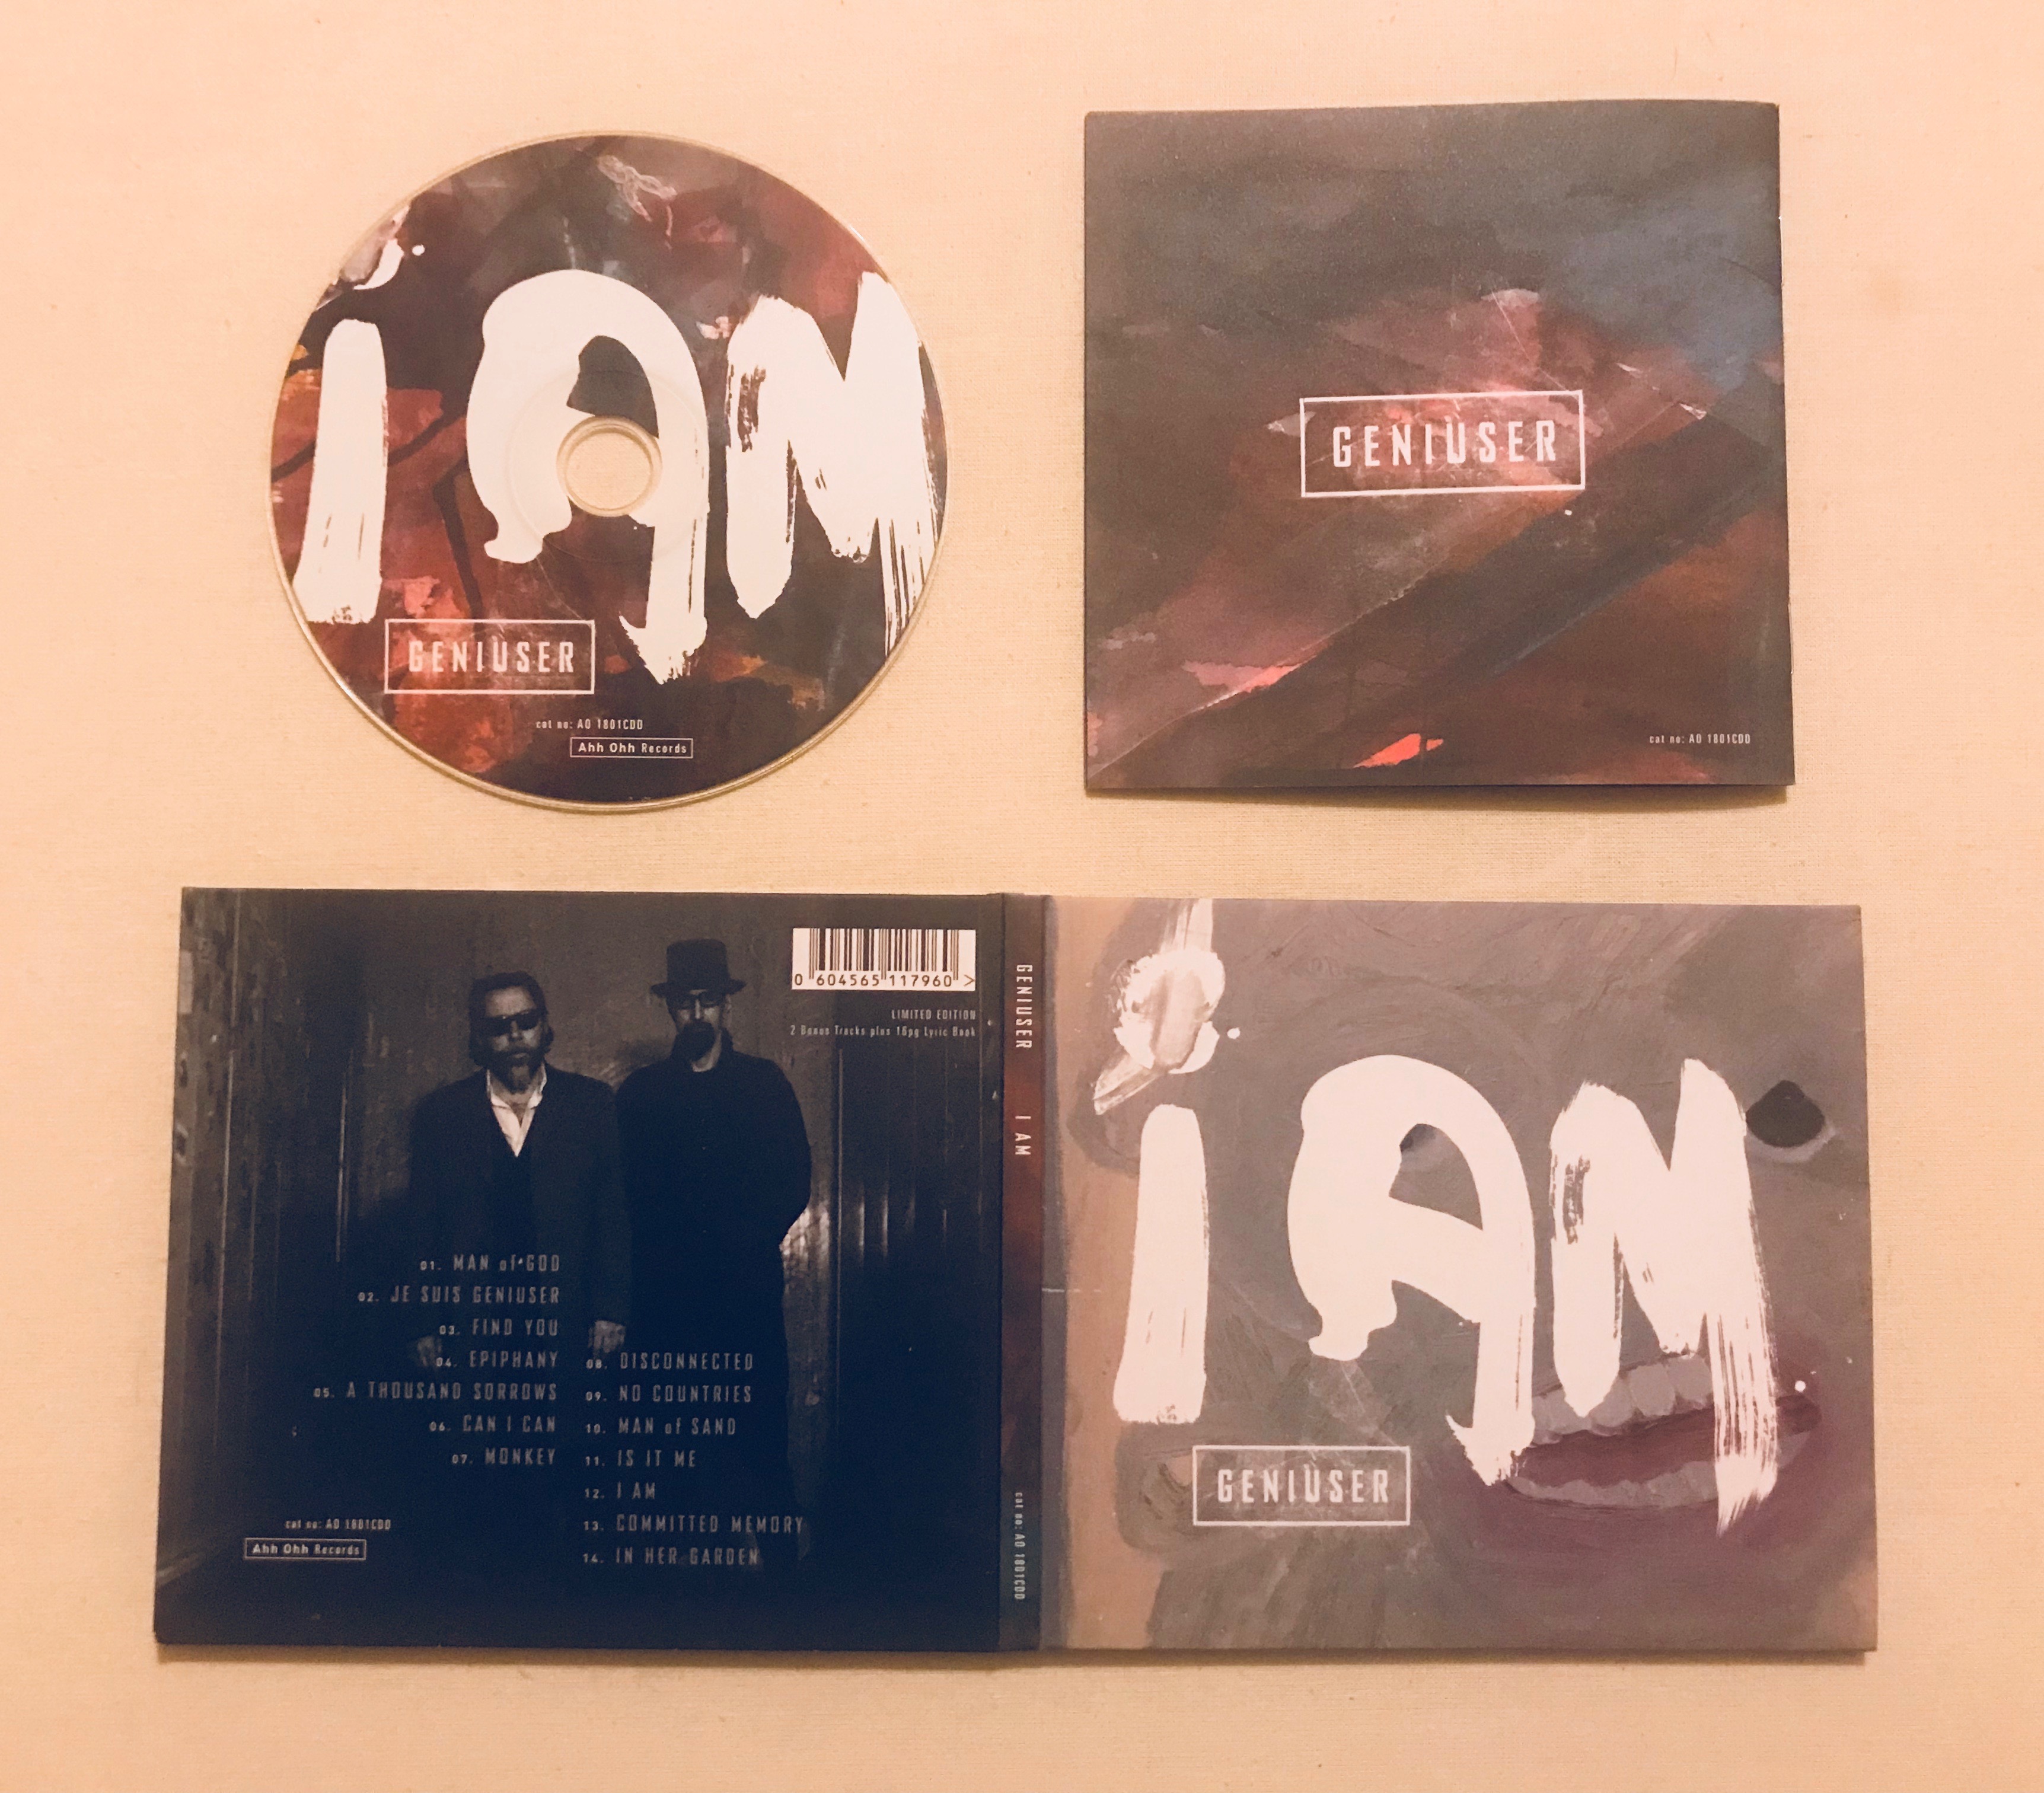 I AM – CD (DELUXE EDITION)